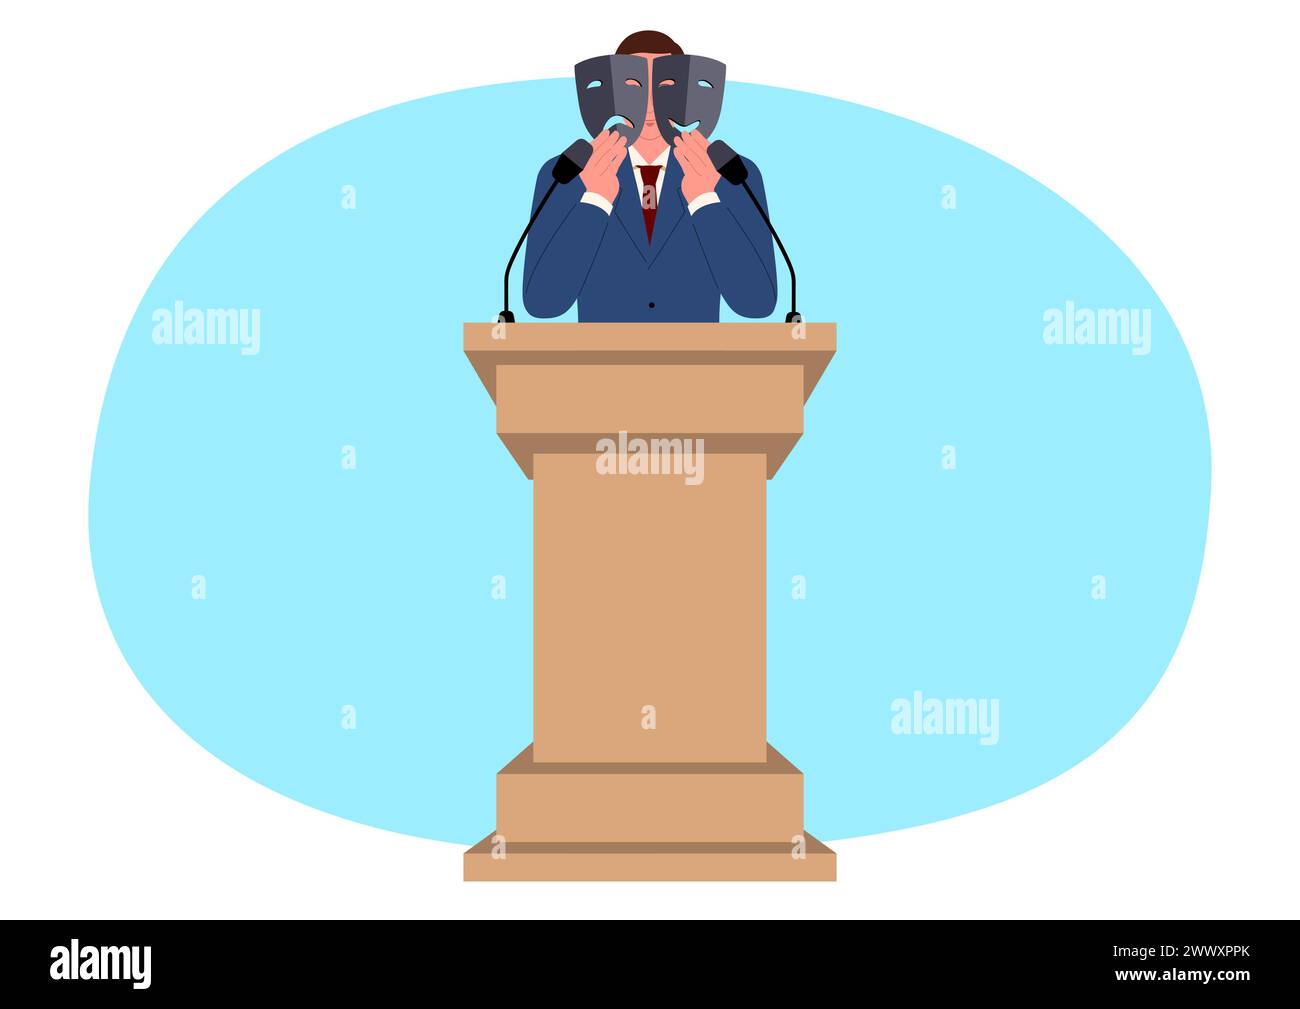 Politician holding both a happy and a sad mask on the podium, symbol of the political personas, conveying the duality of expressions in the public eye Stock Vector